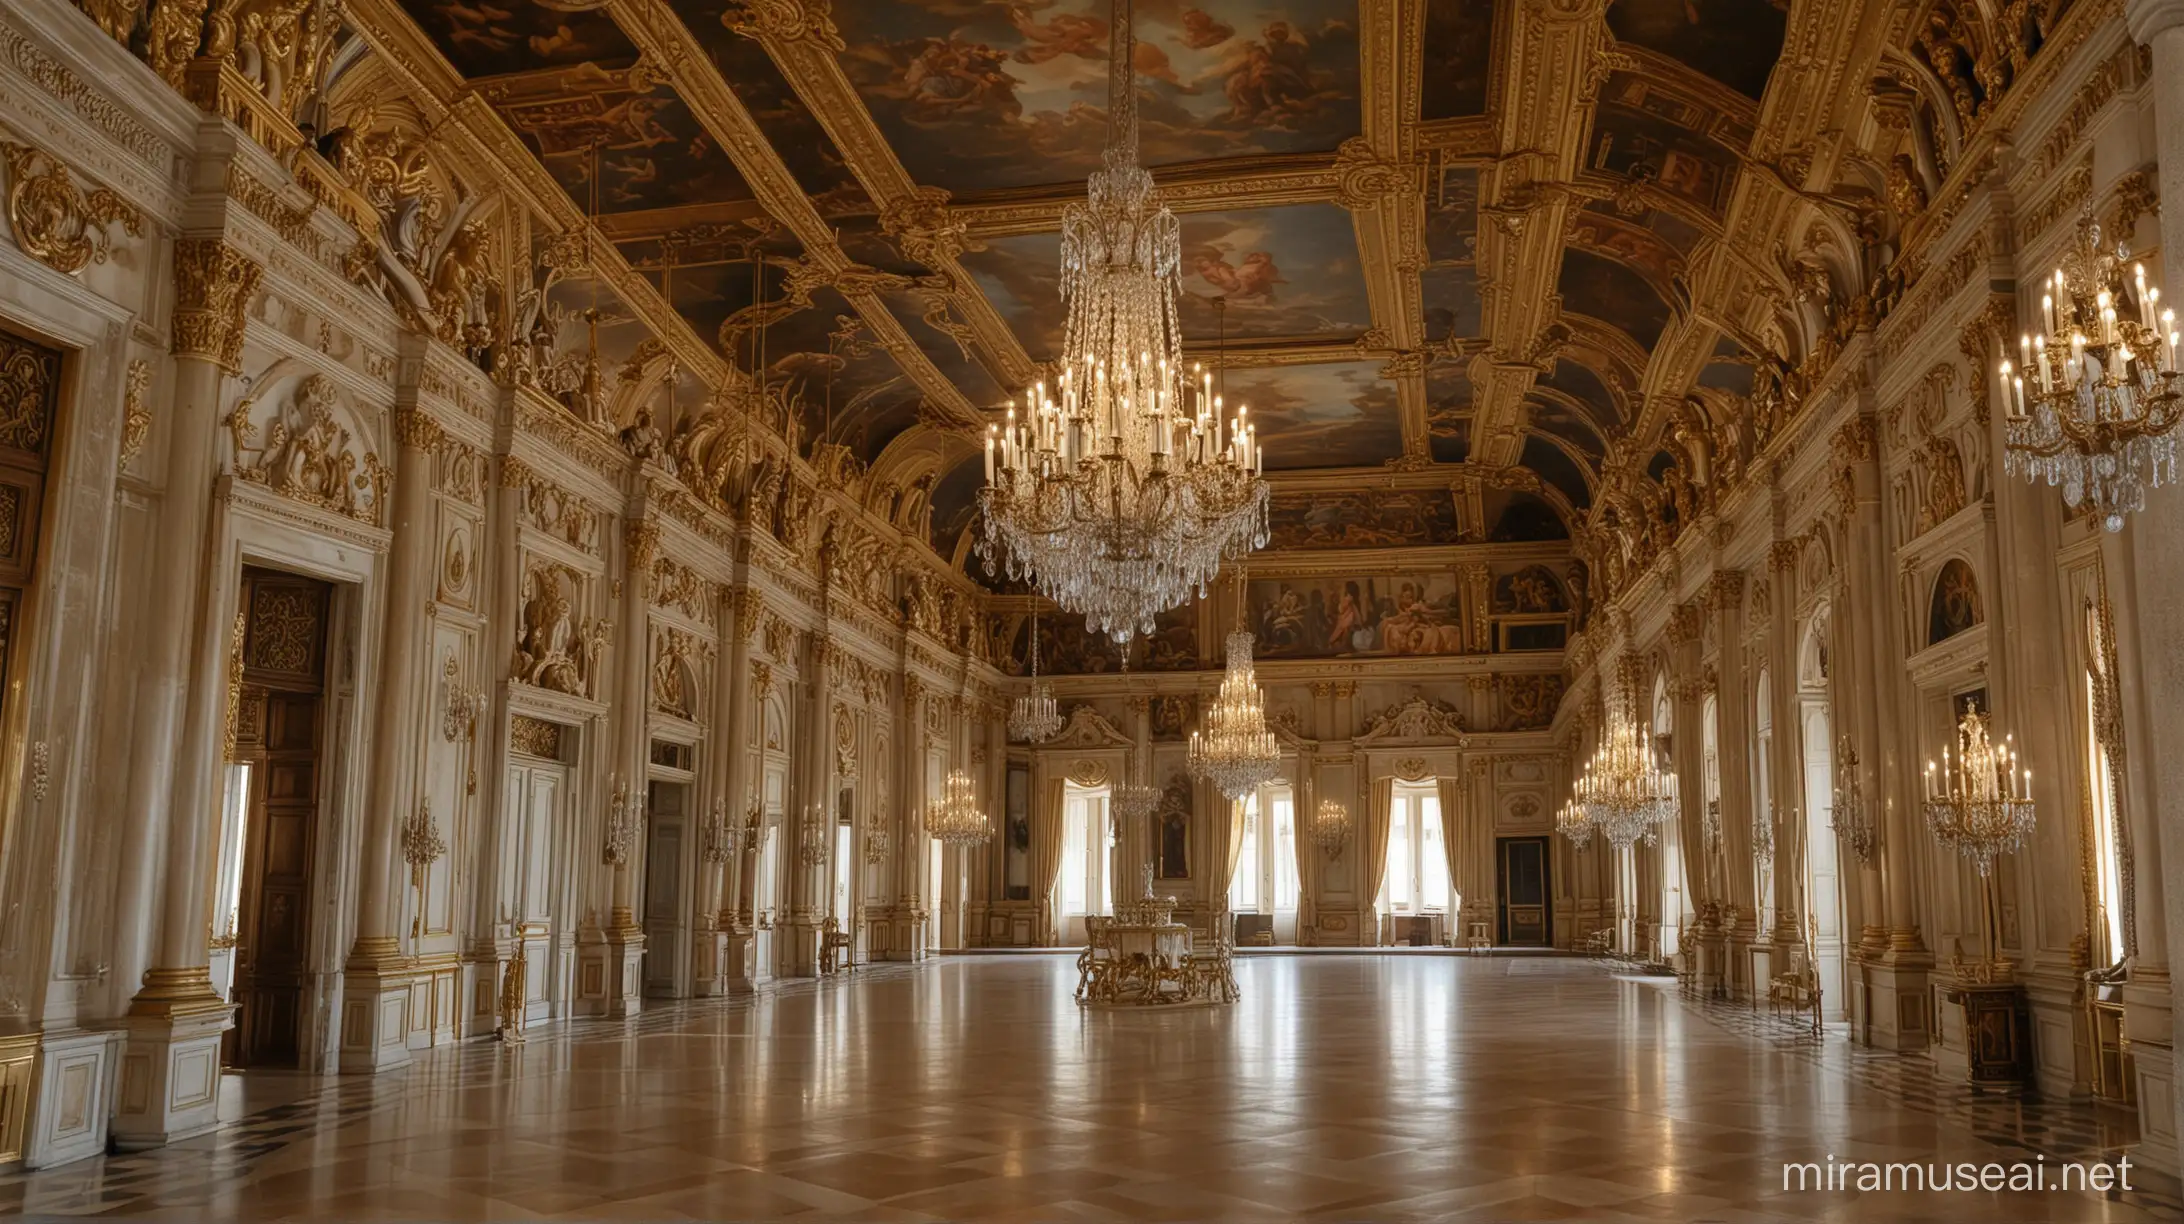 Regal Palace Interior with Ornate Decor and Grand Hall